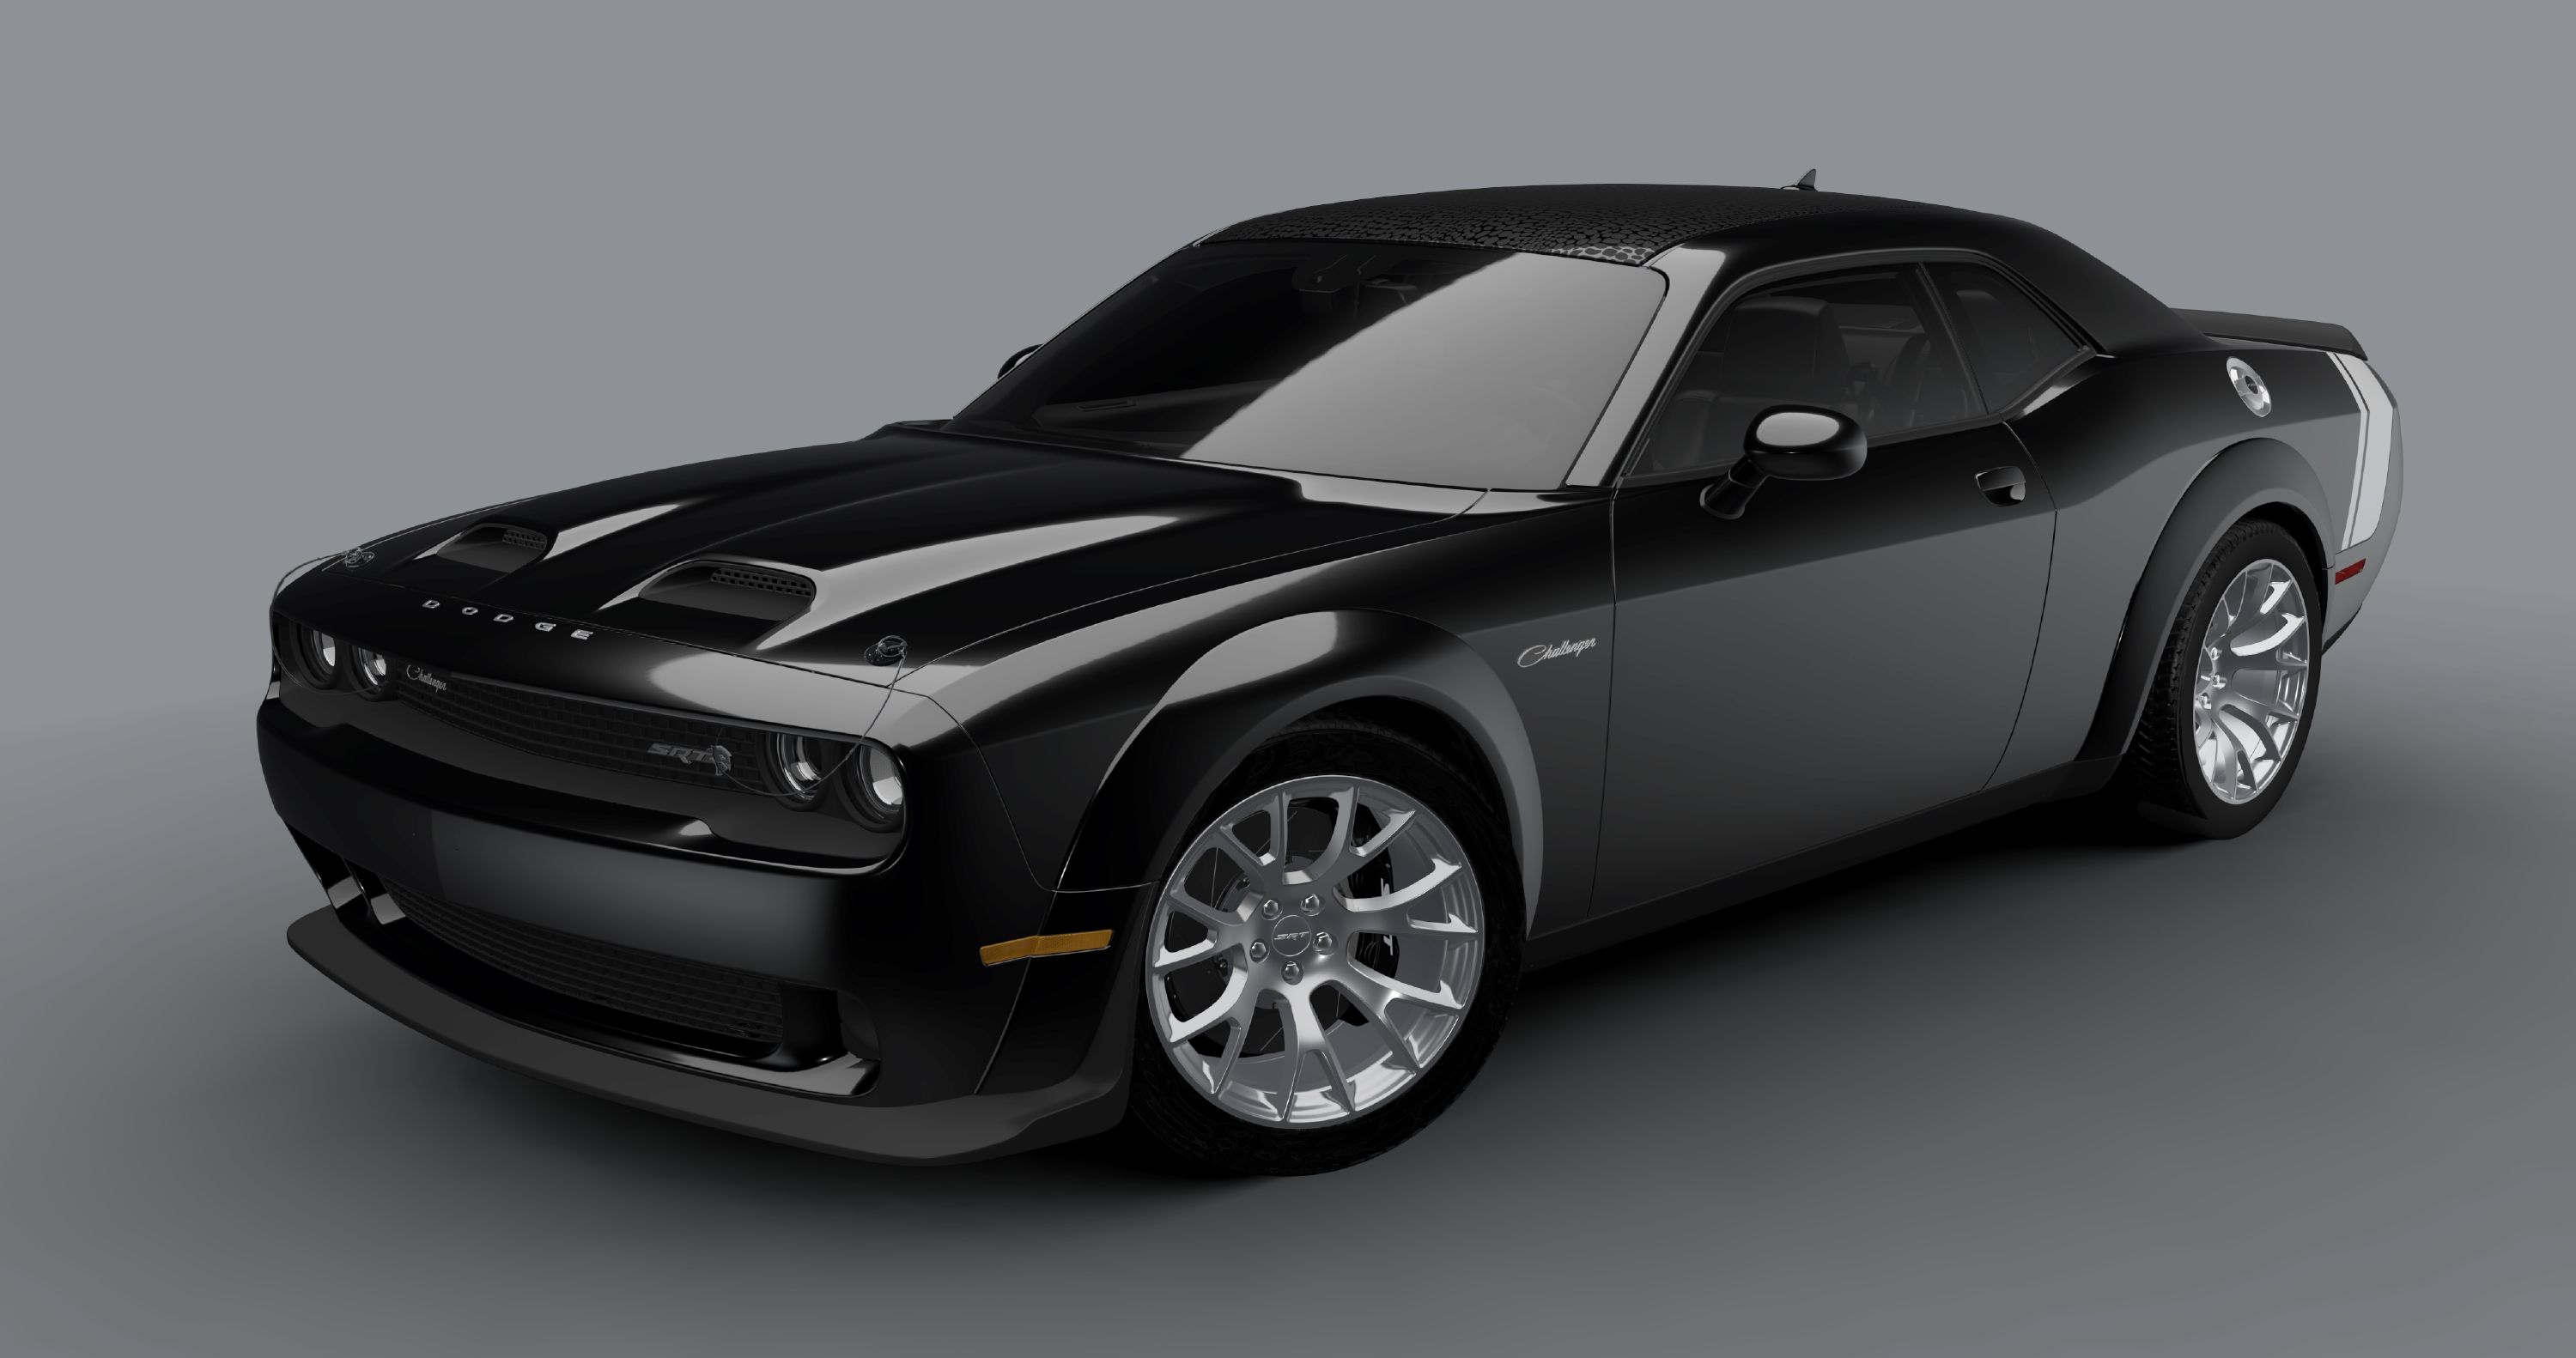 Dodge Celebrates Chargers and Challengers with 'Last Calls